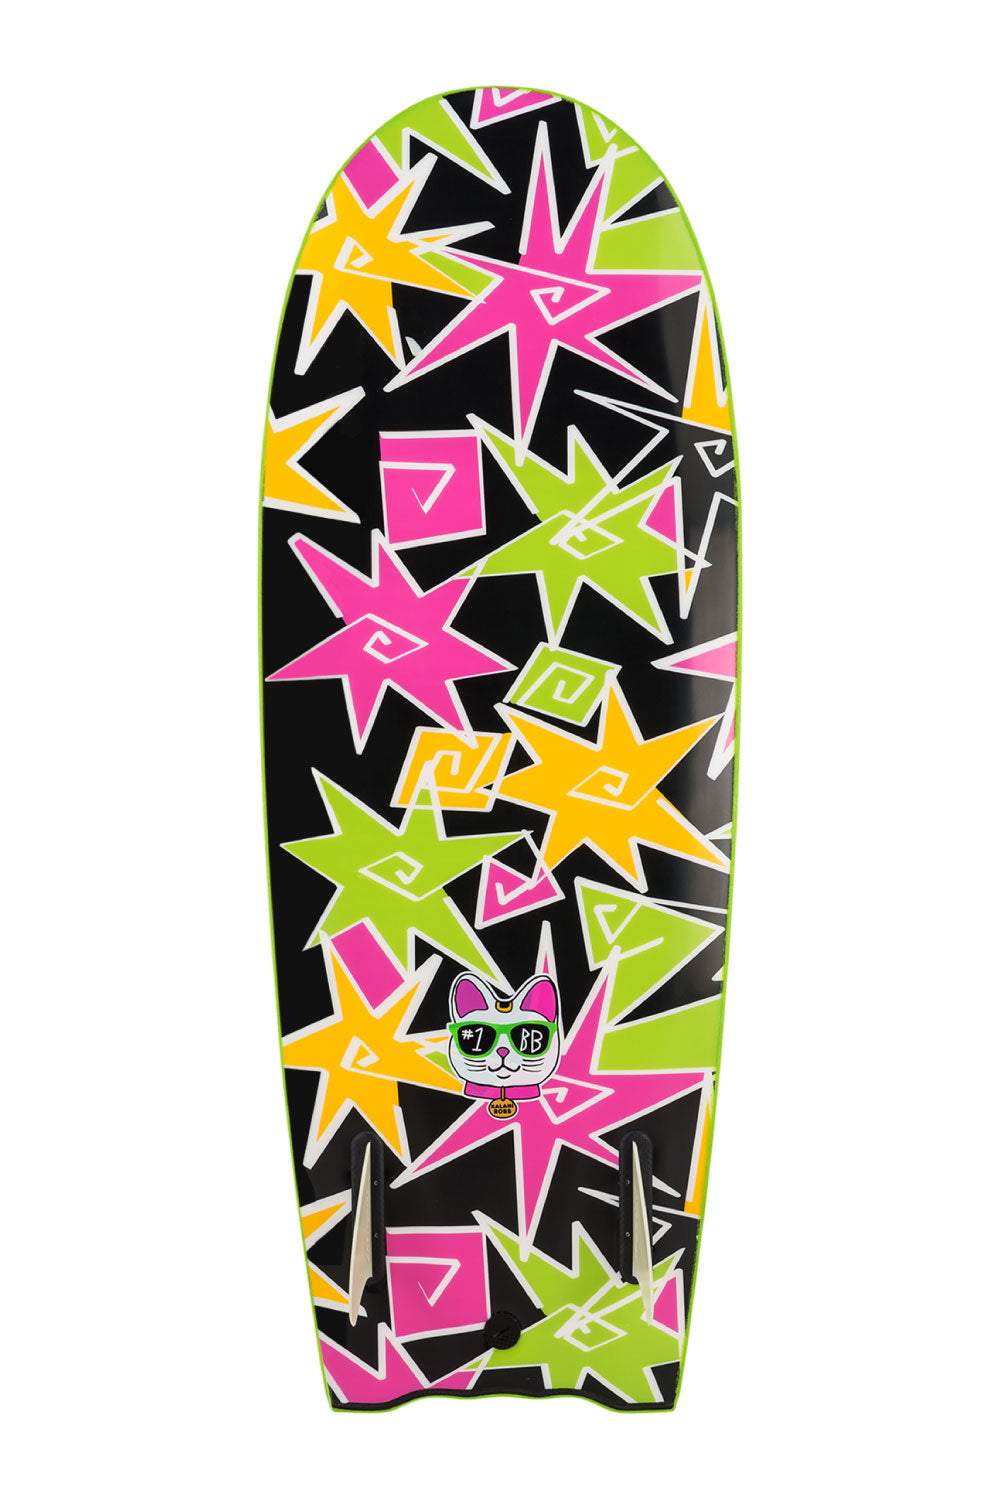 Catch Surf Beater Sig Pro 54 Kalani Robb - Lime Green